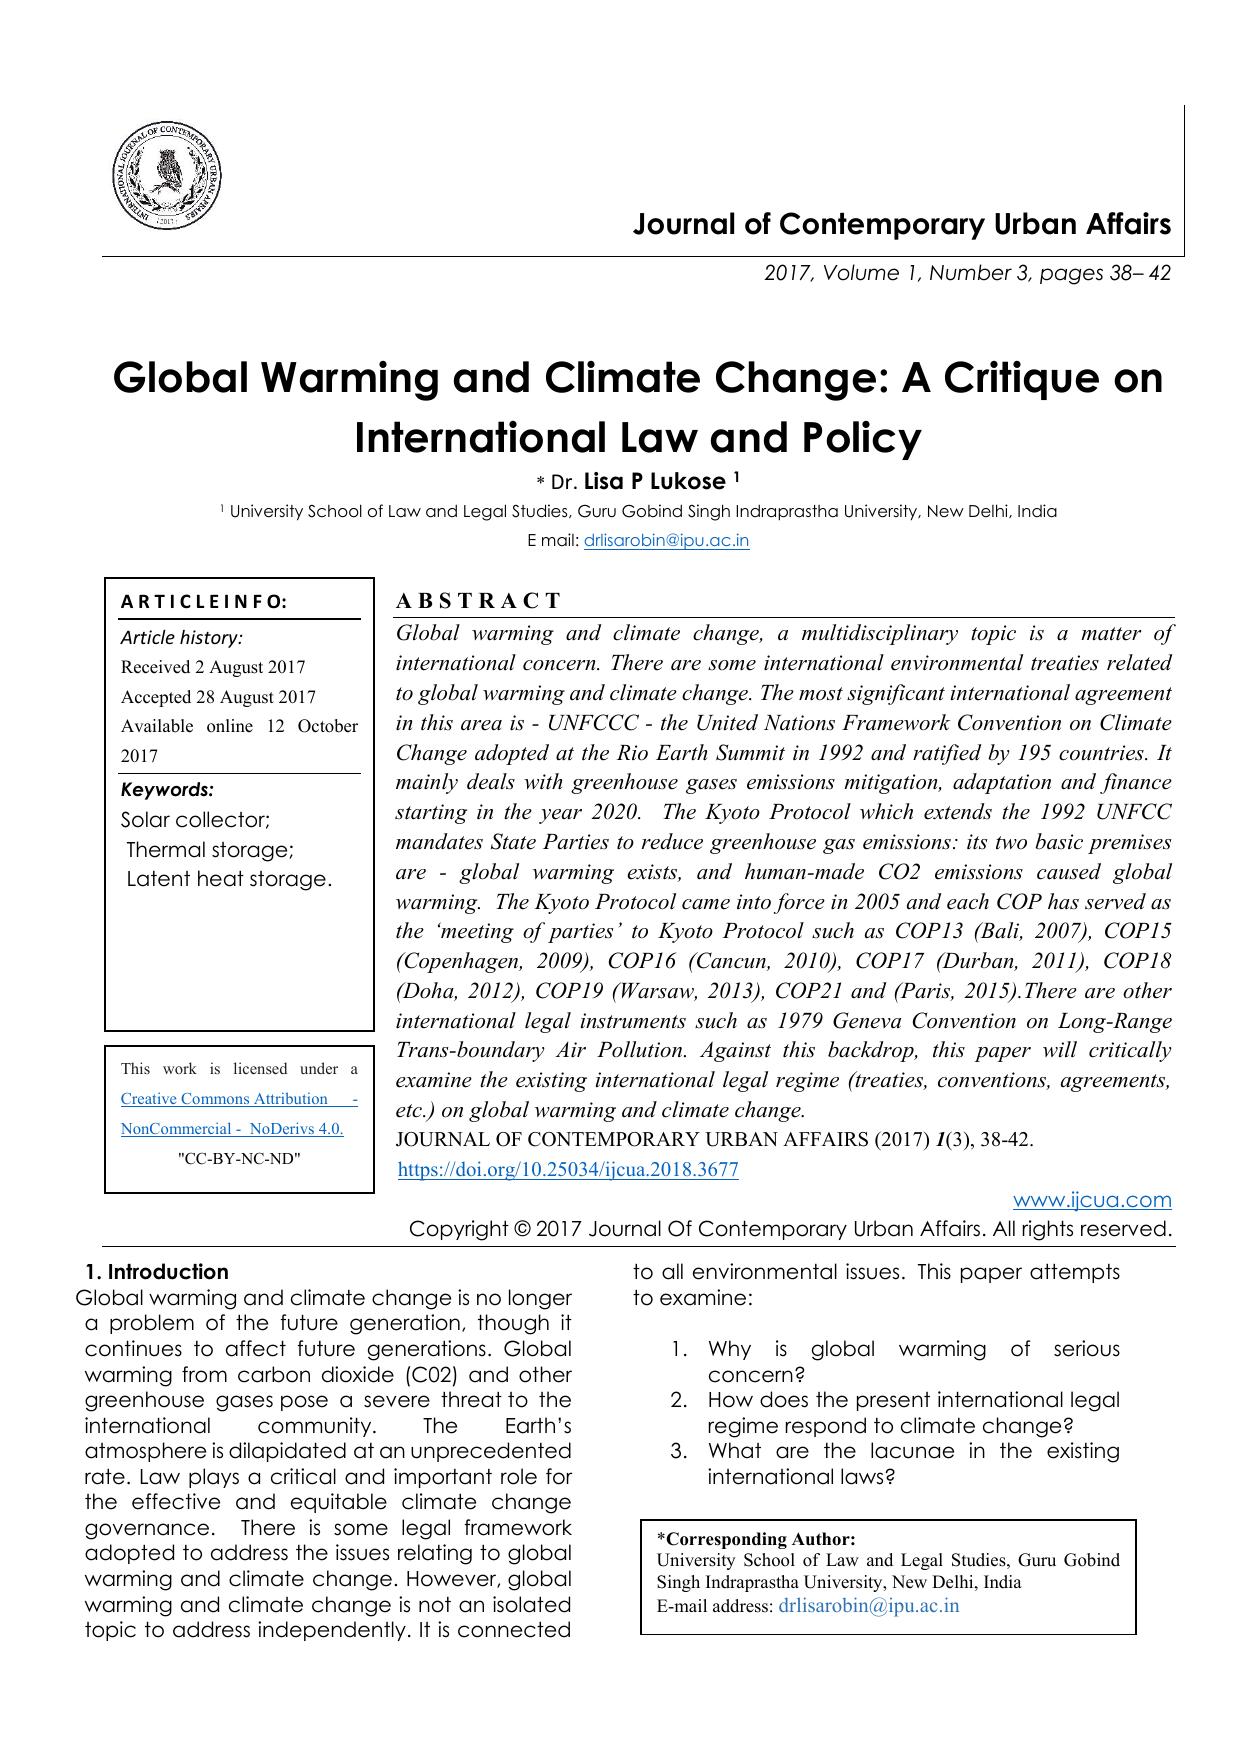 Global Warming and Climate Change A Critique on International Law and Policy